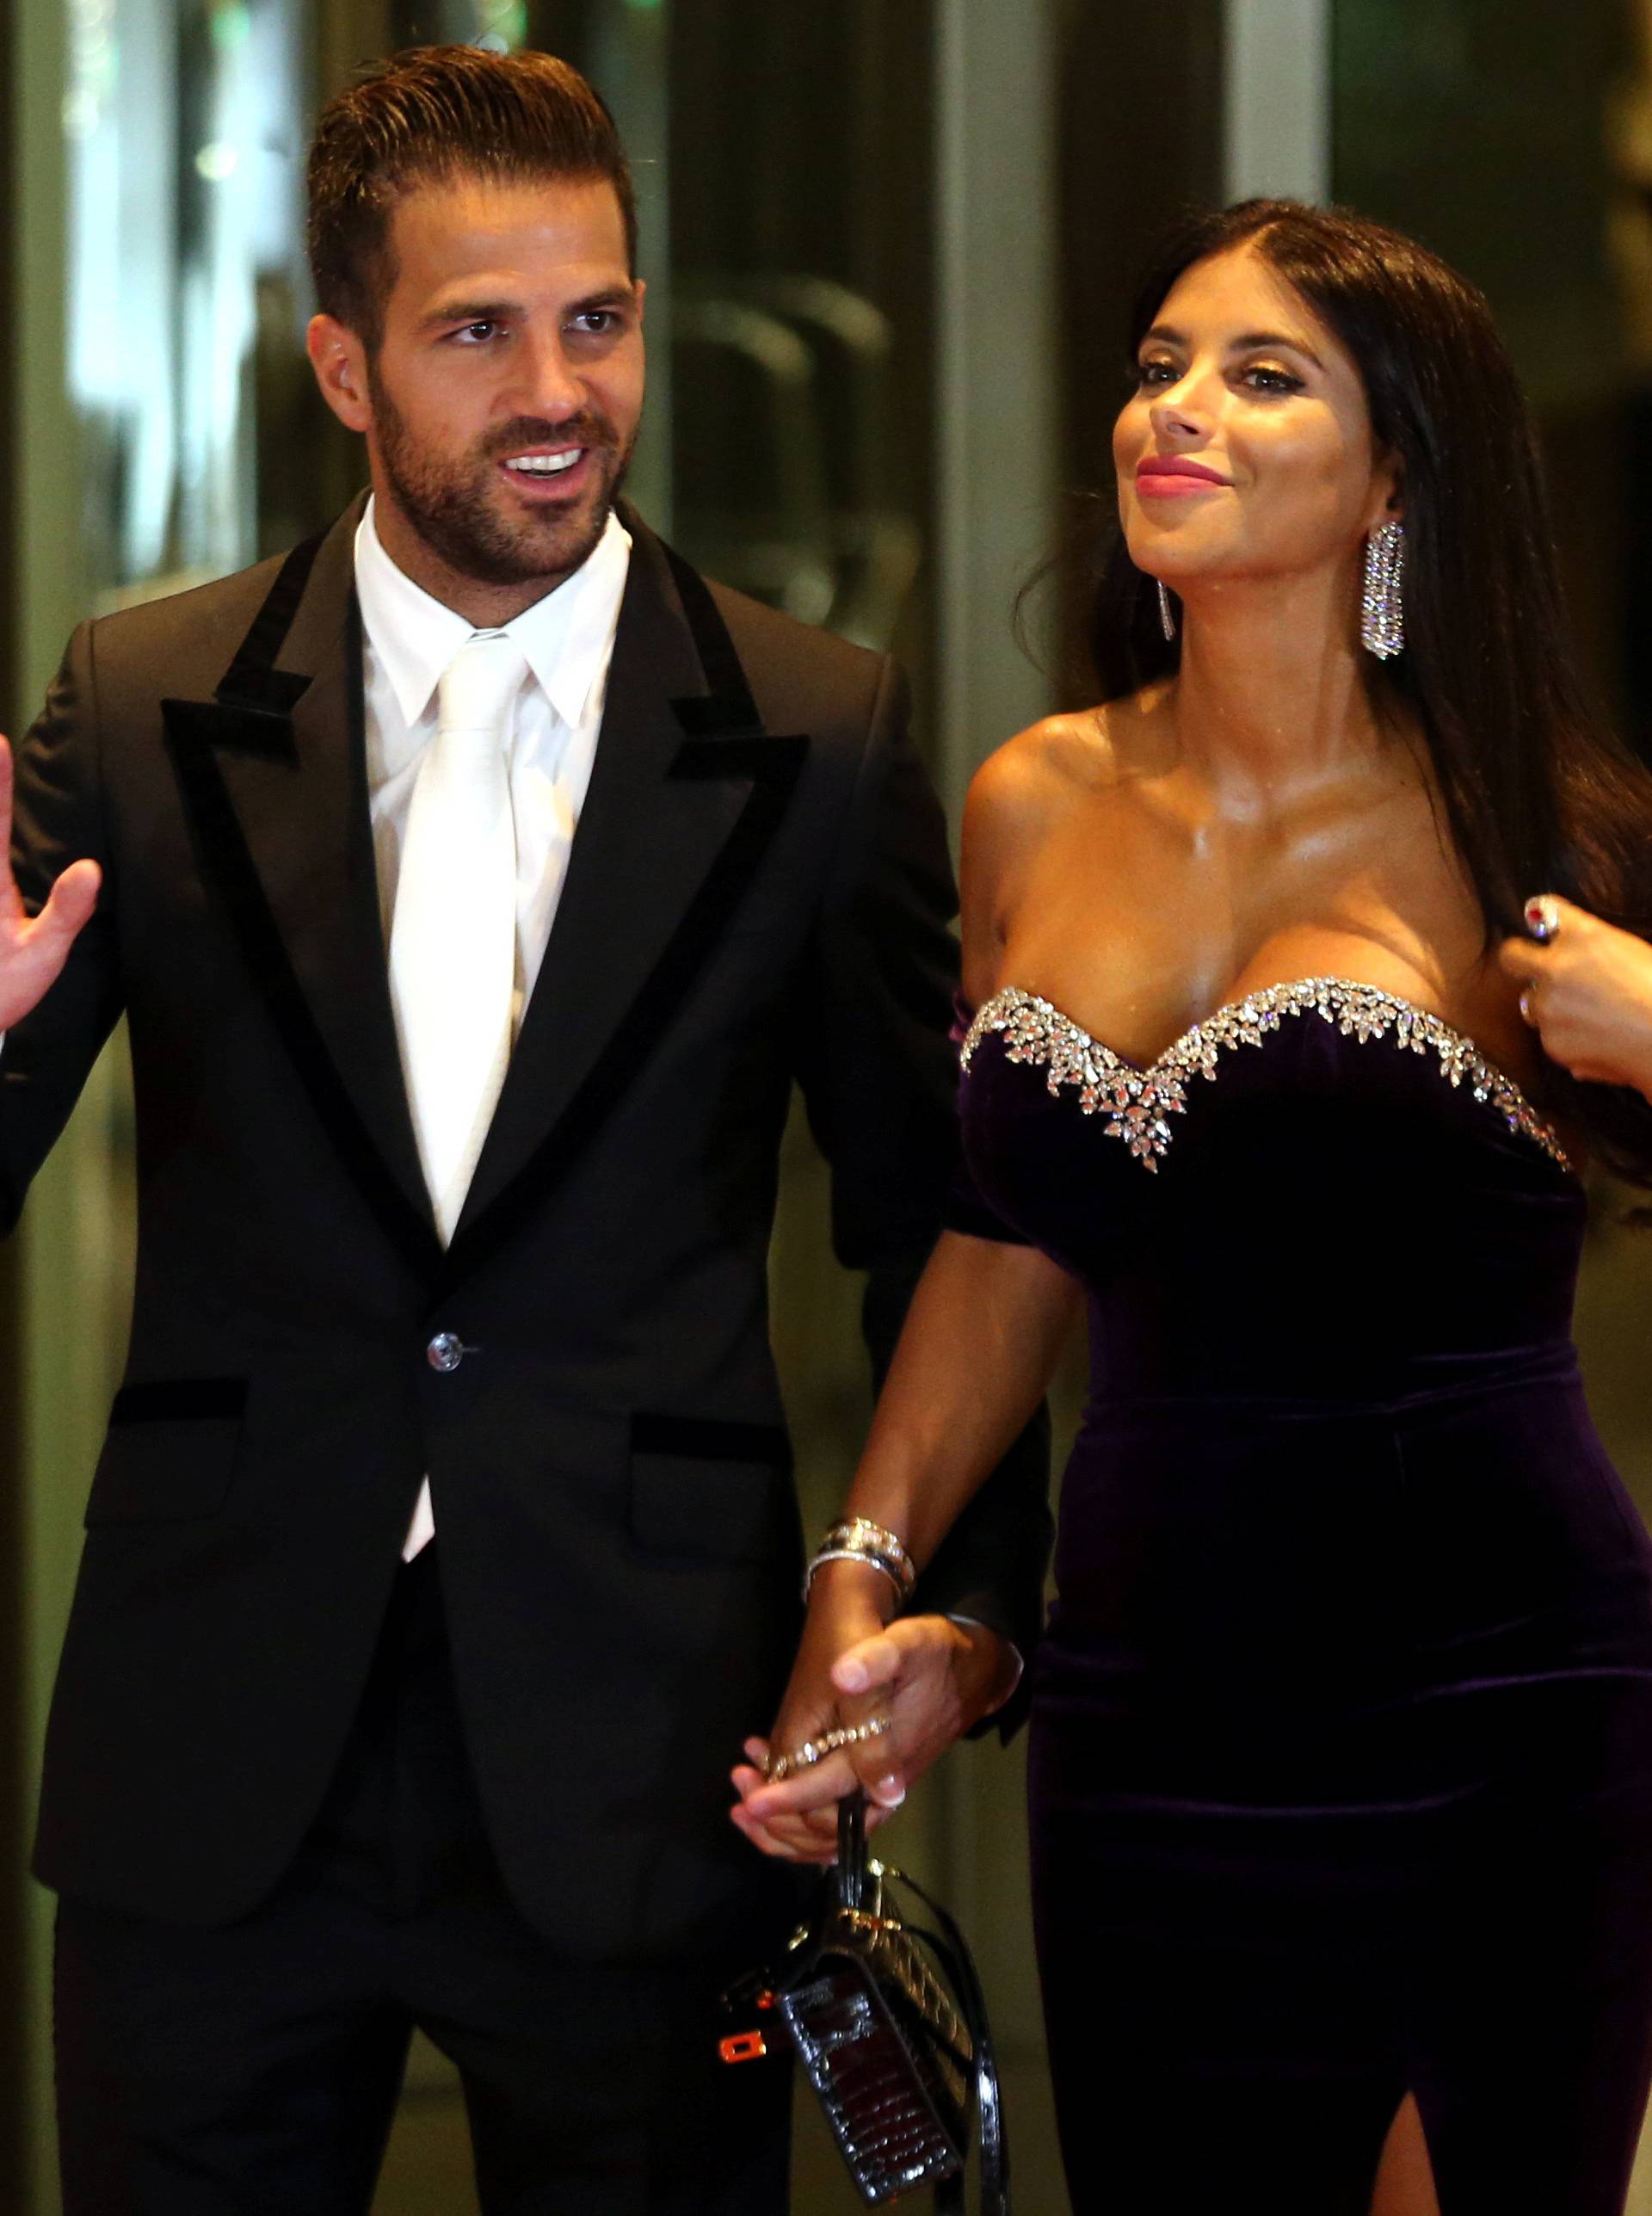 Argentine soccer player Lionel Messi's former Barcelona FC teammate Cesc Fabregas and his wife Daniella Semaan pose for photographers as they arrive to the wedding of Messi and Antonela Roccuzzo in Rosario